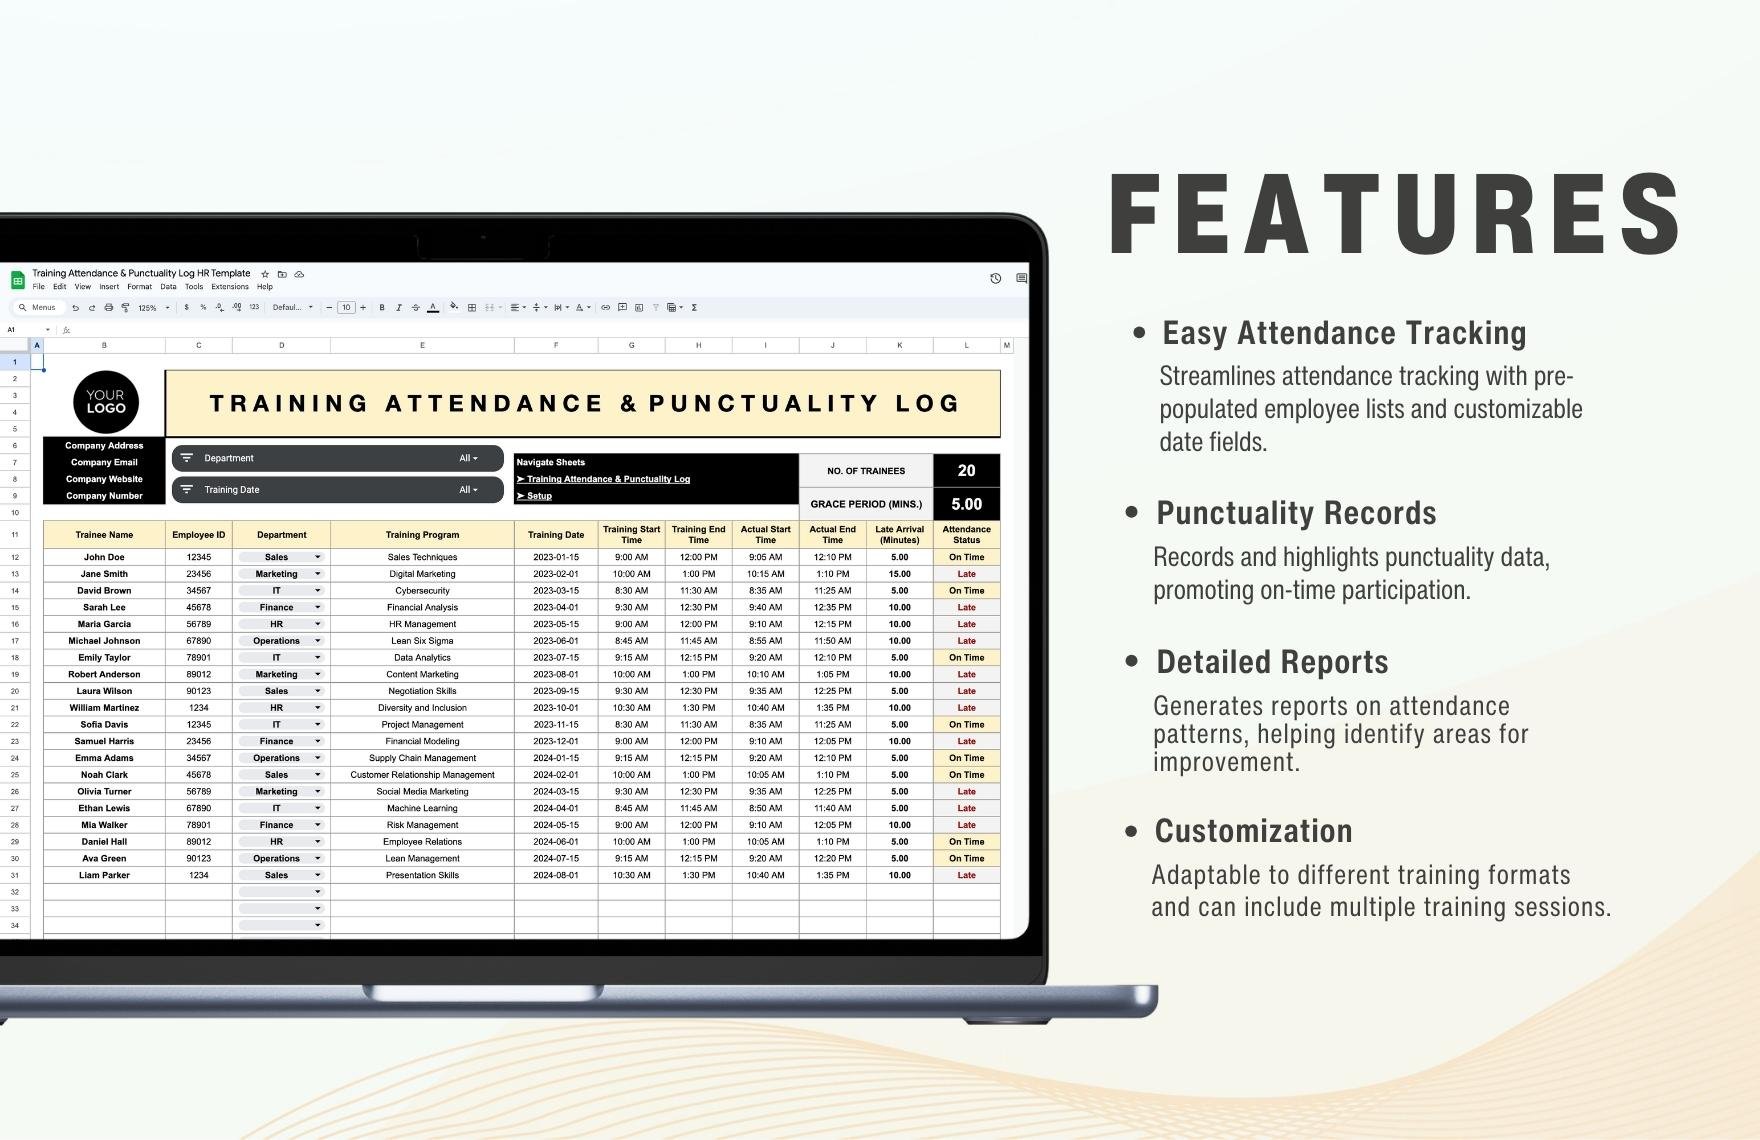 Training Attendance & Punctuality Log HR Template